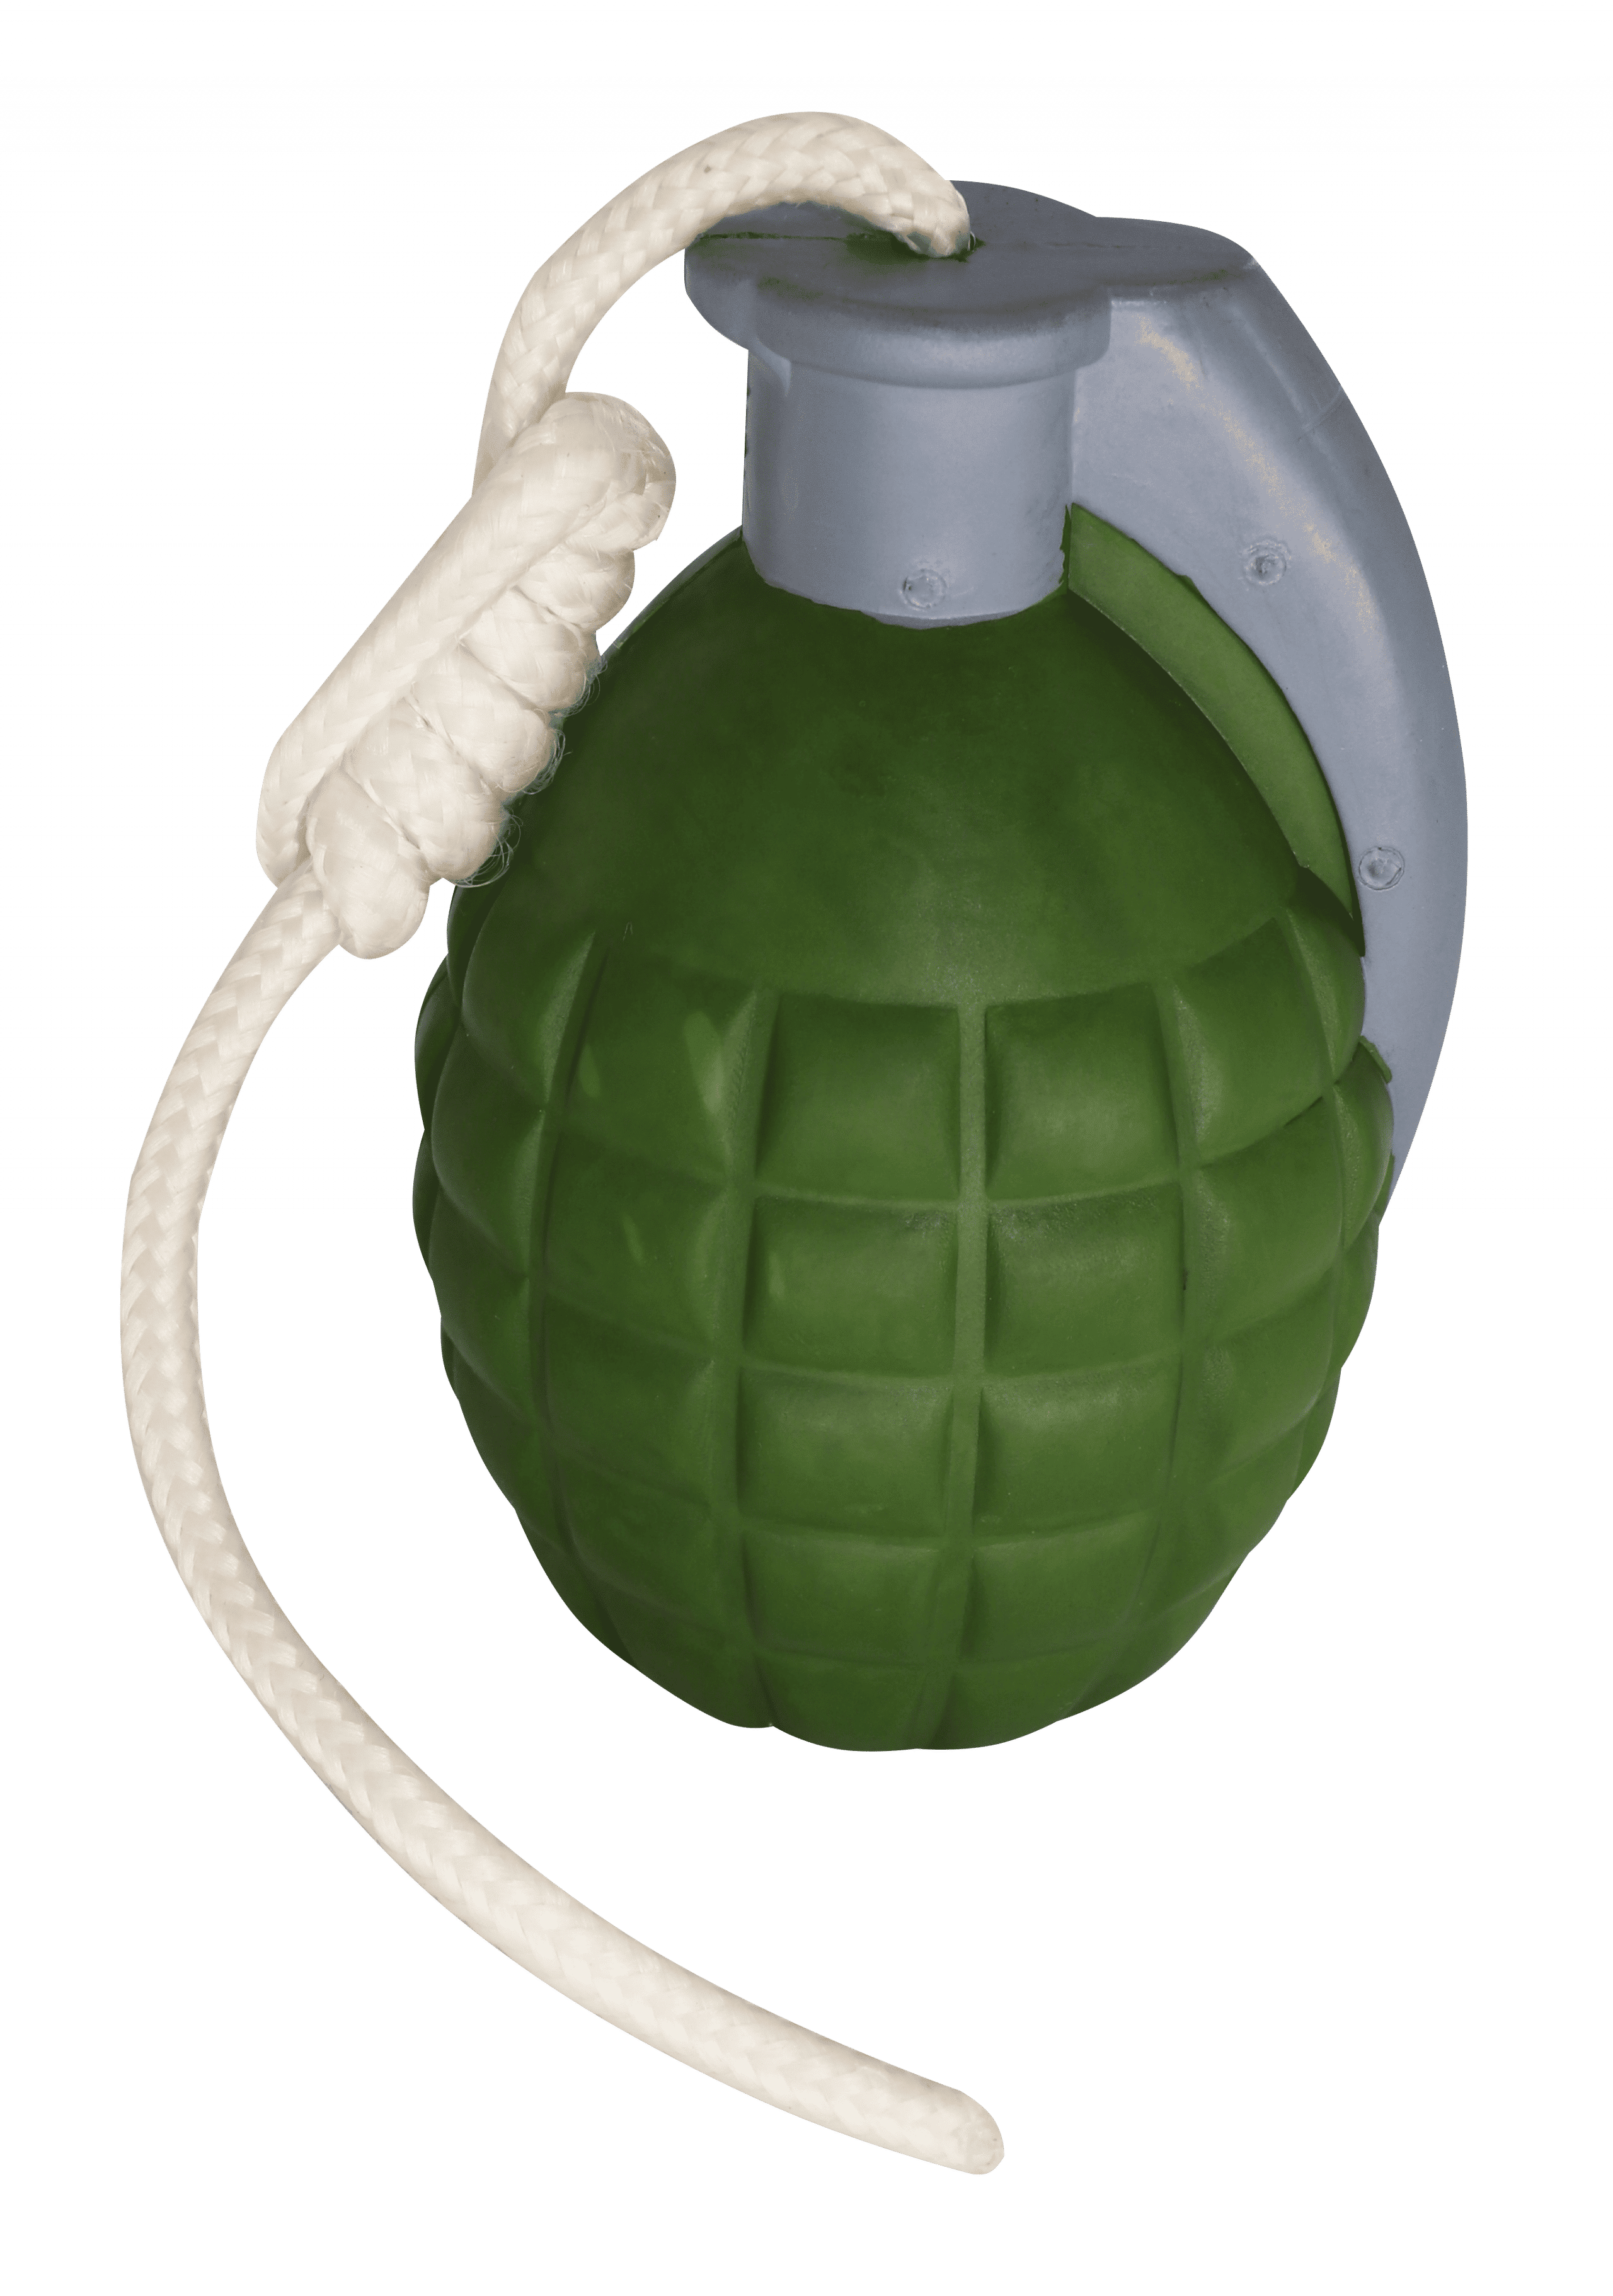 Green Grenade Shaped Dog Toy